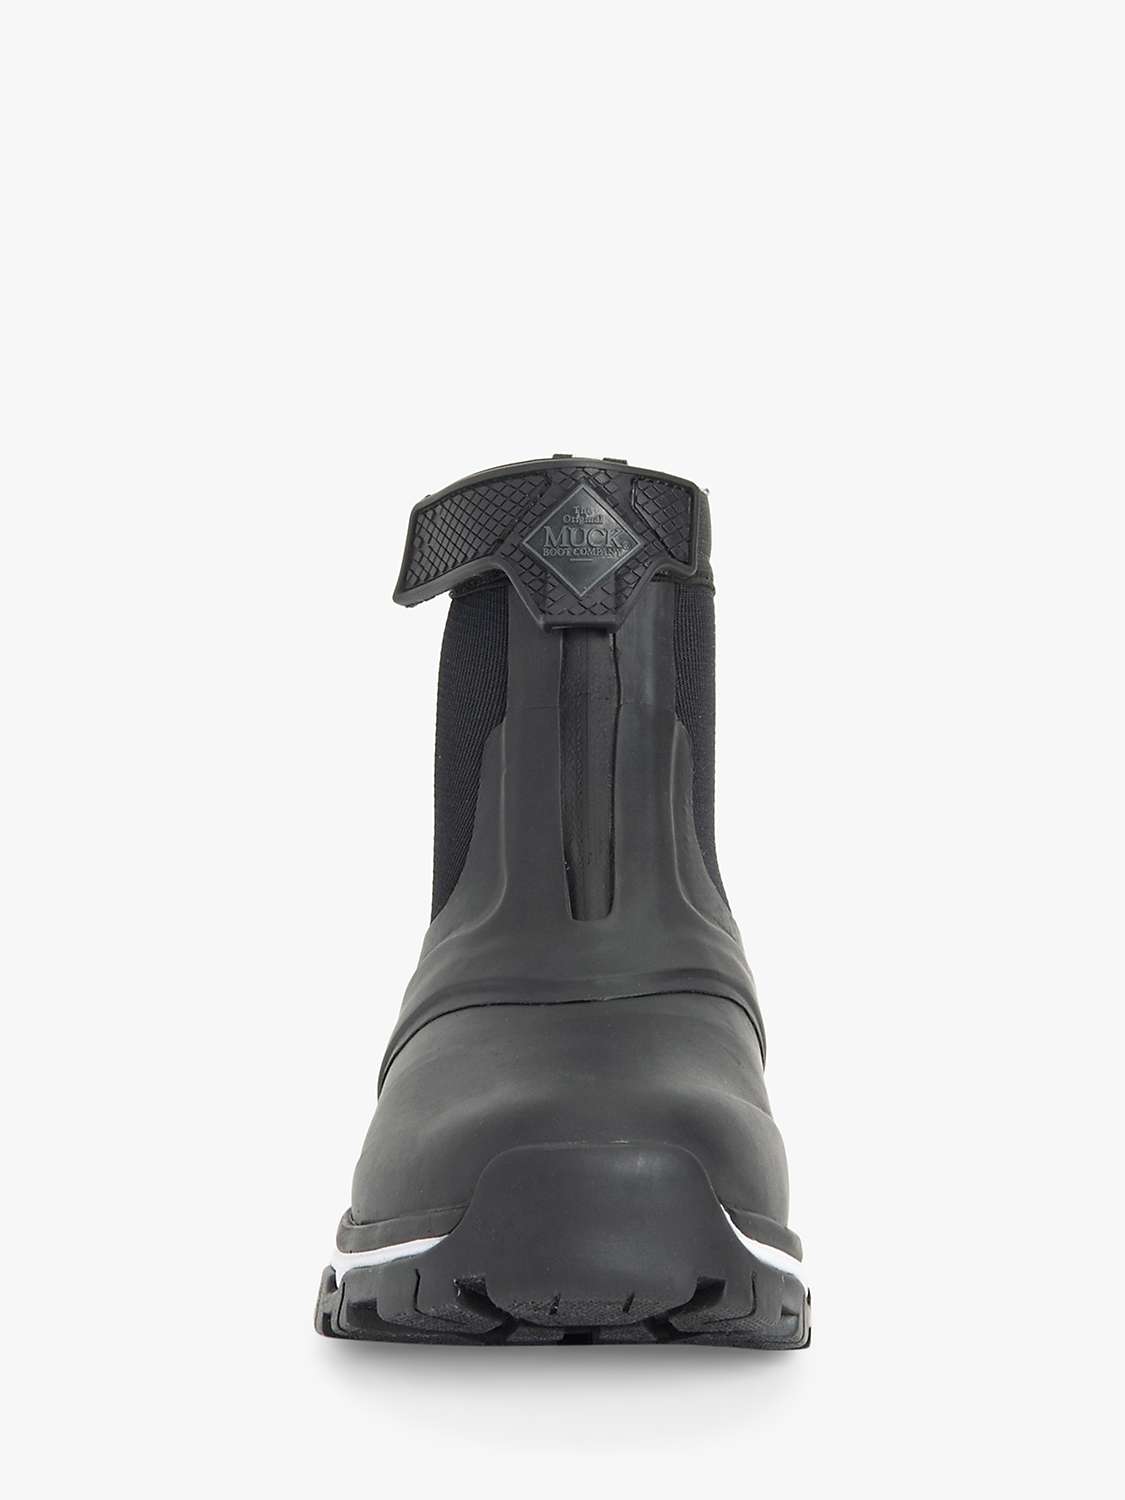 Buy Muck Apex Women's Zip Up Ankle Boots Online at johnlewis.com